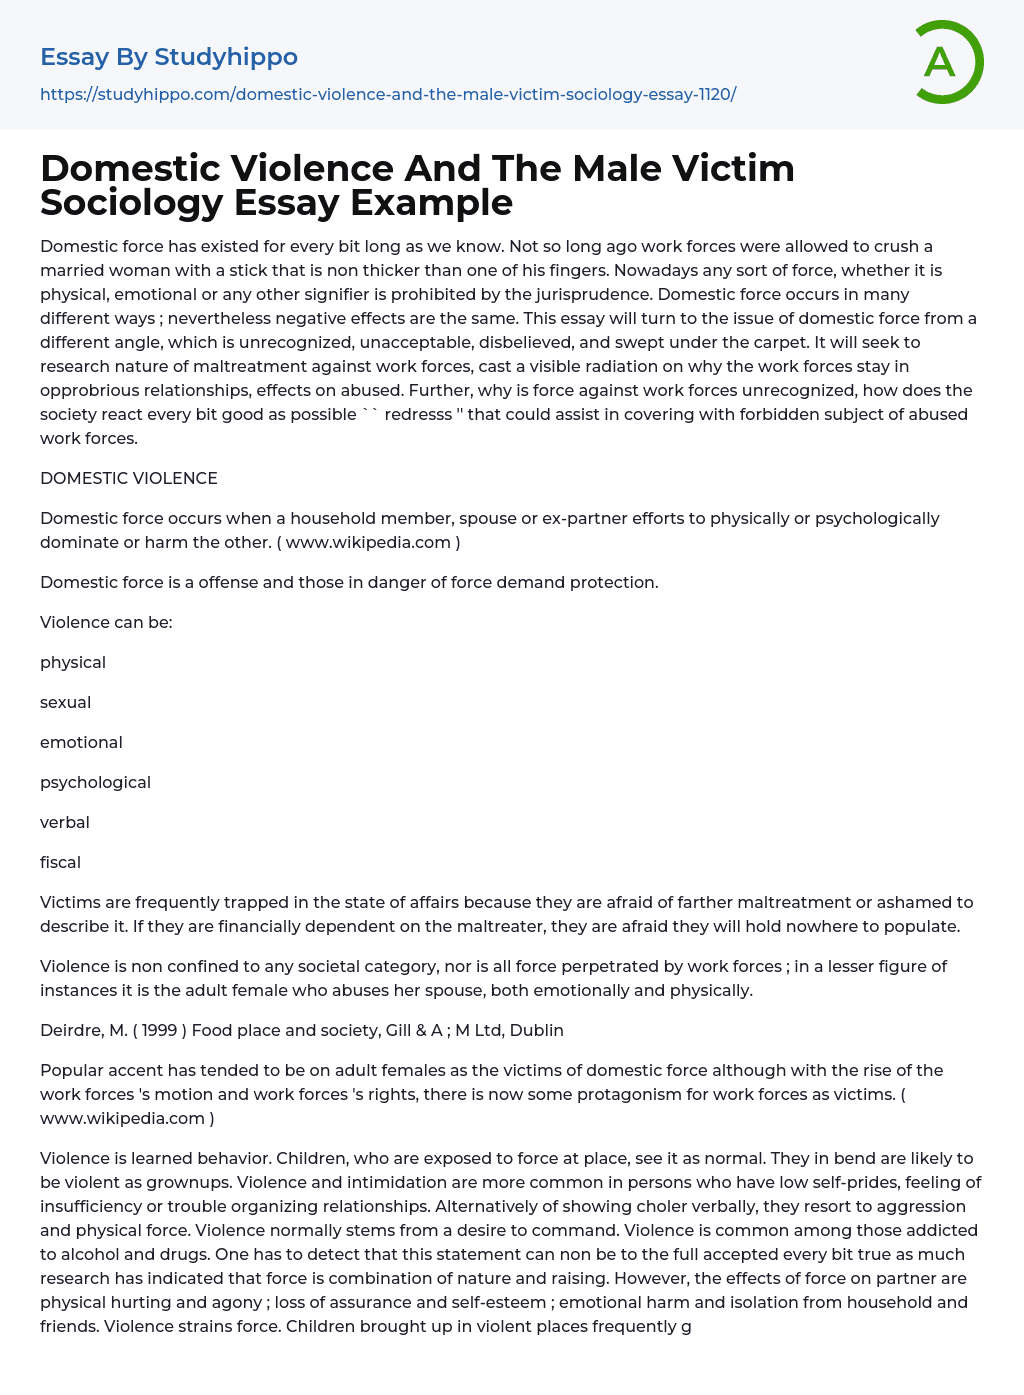 Domestic Violence And The Male Victim Sociology Essay Example